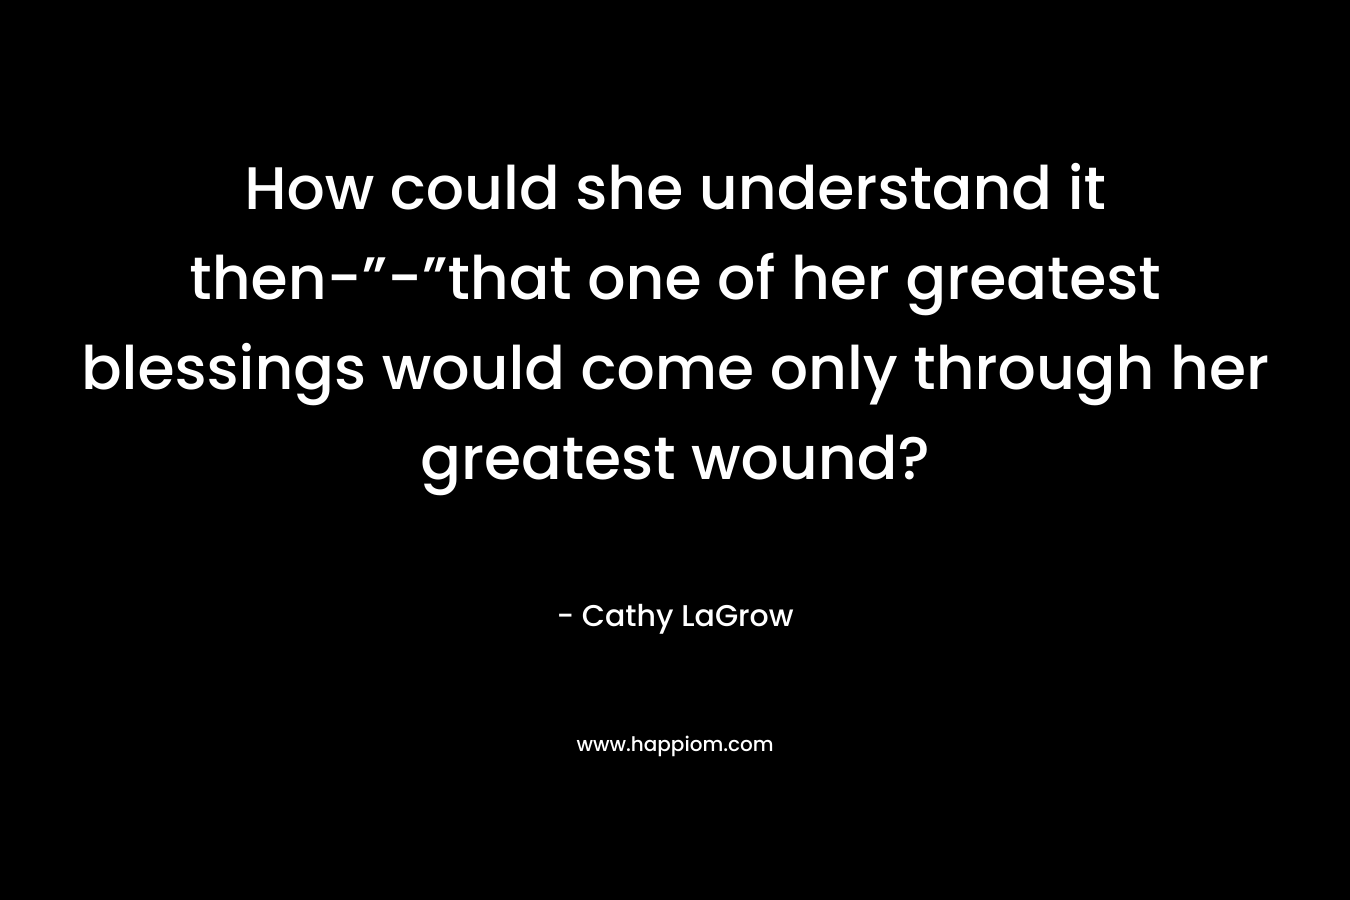 How could she understand it then-”-”that one of her greatest blessings would come only through her greatest wound? – Cathy LaGrow